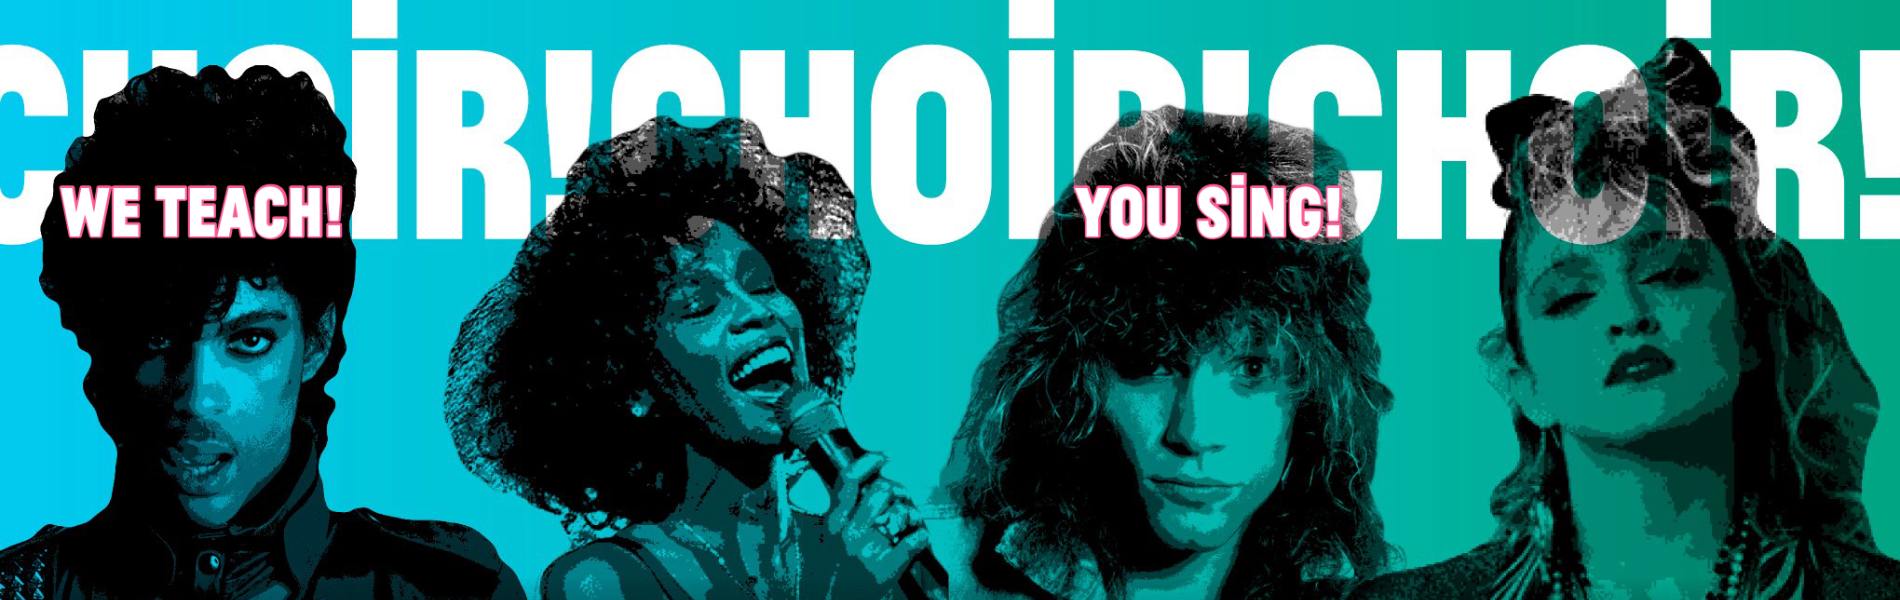 Stylised black images of singers from the 1980s against a teal green background